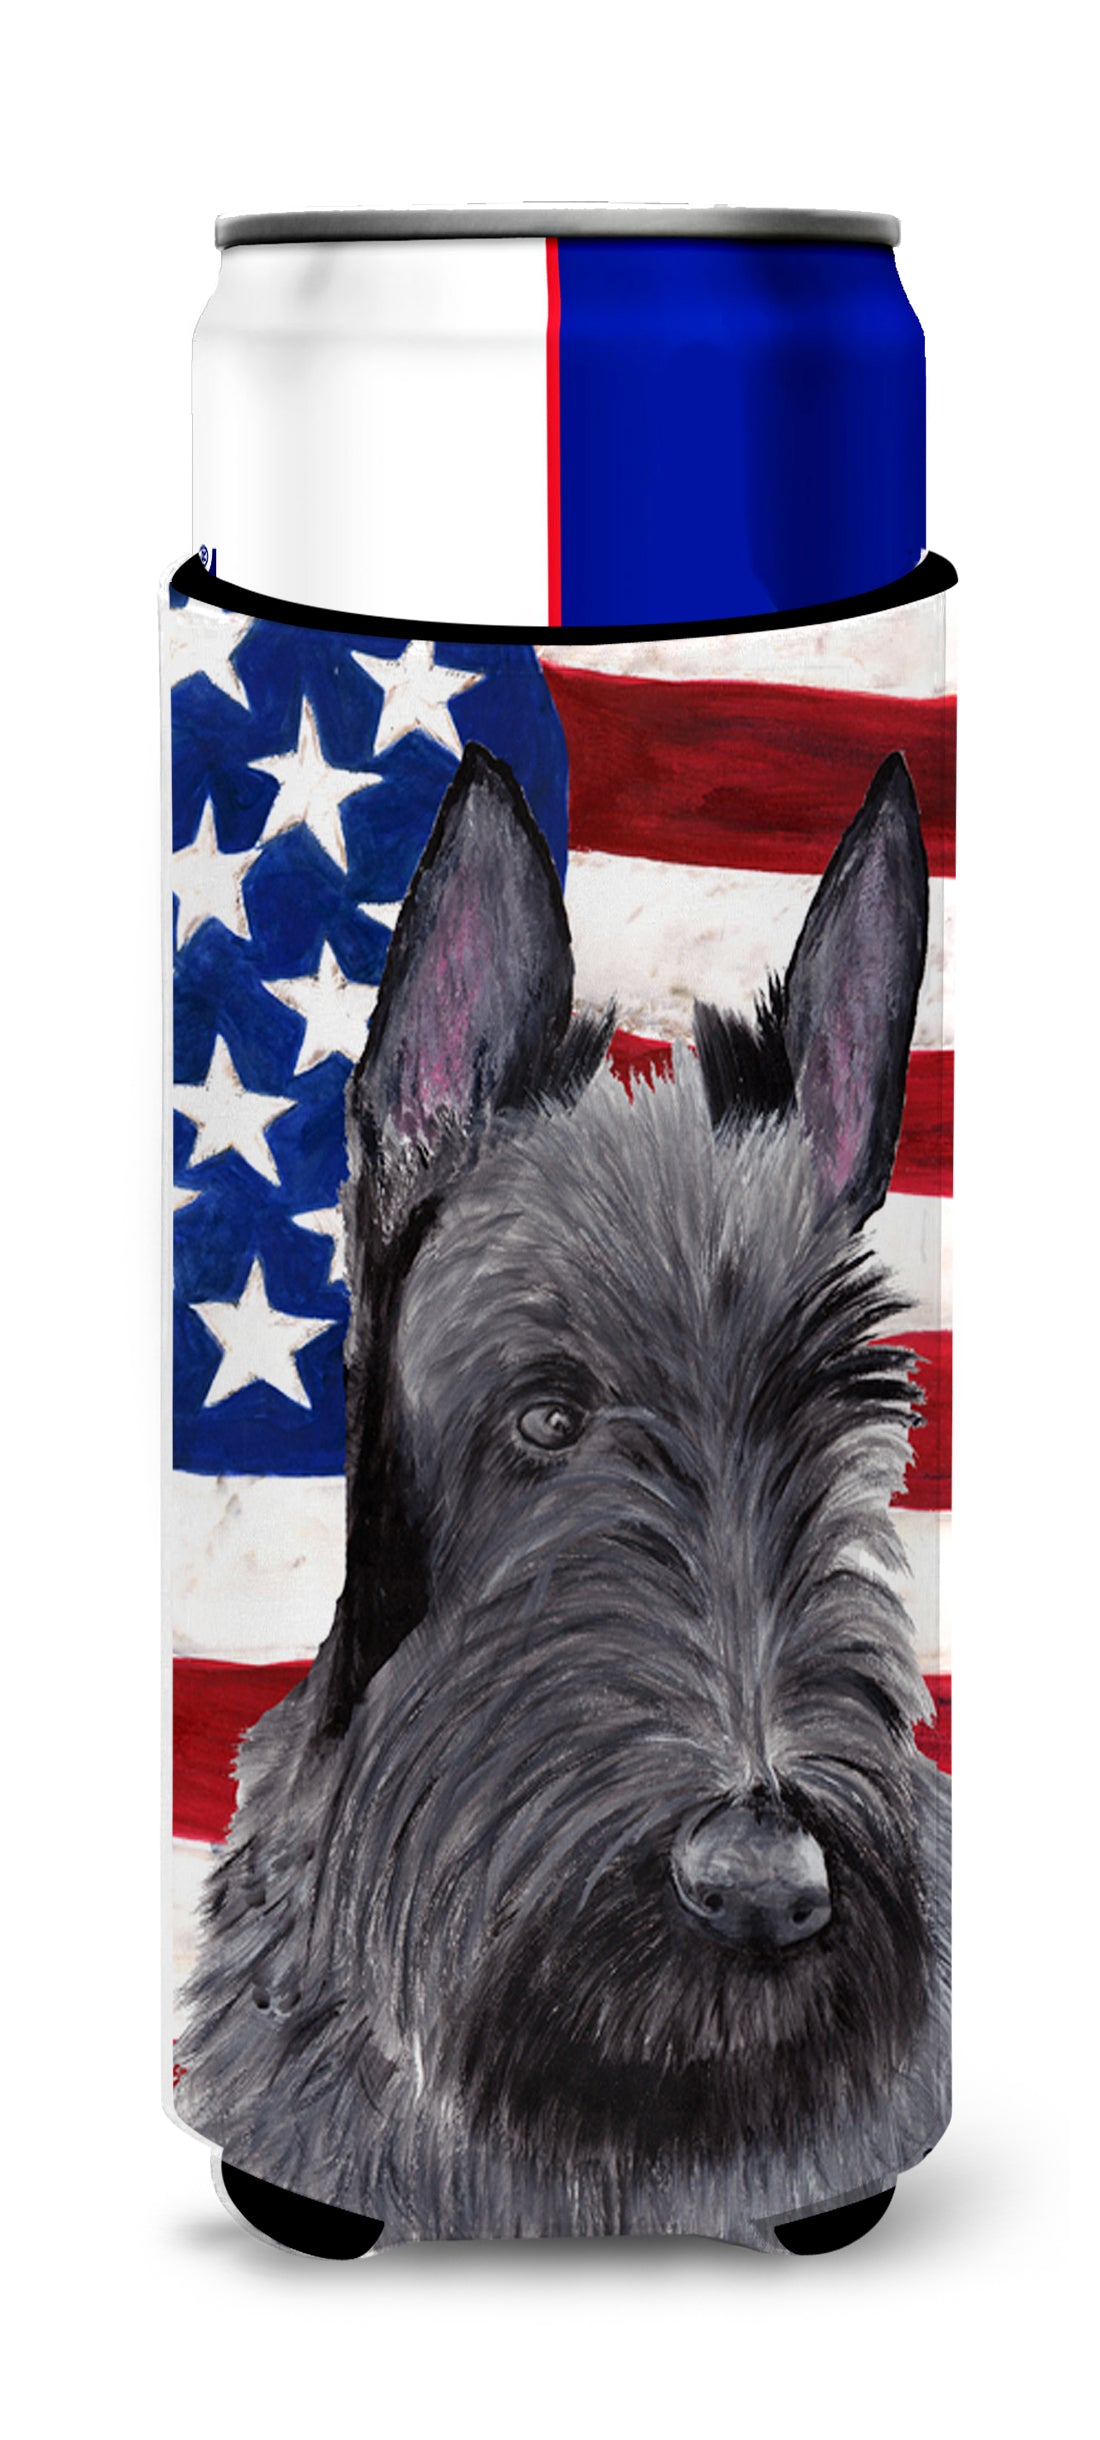 USA American Flag with Scottish Terrier Ultra Beverage Insulators for slim cans SC9032MUK.